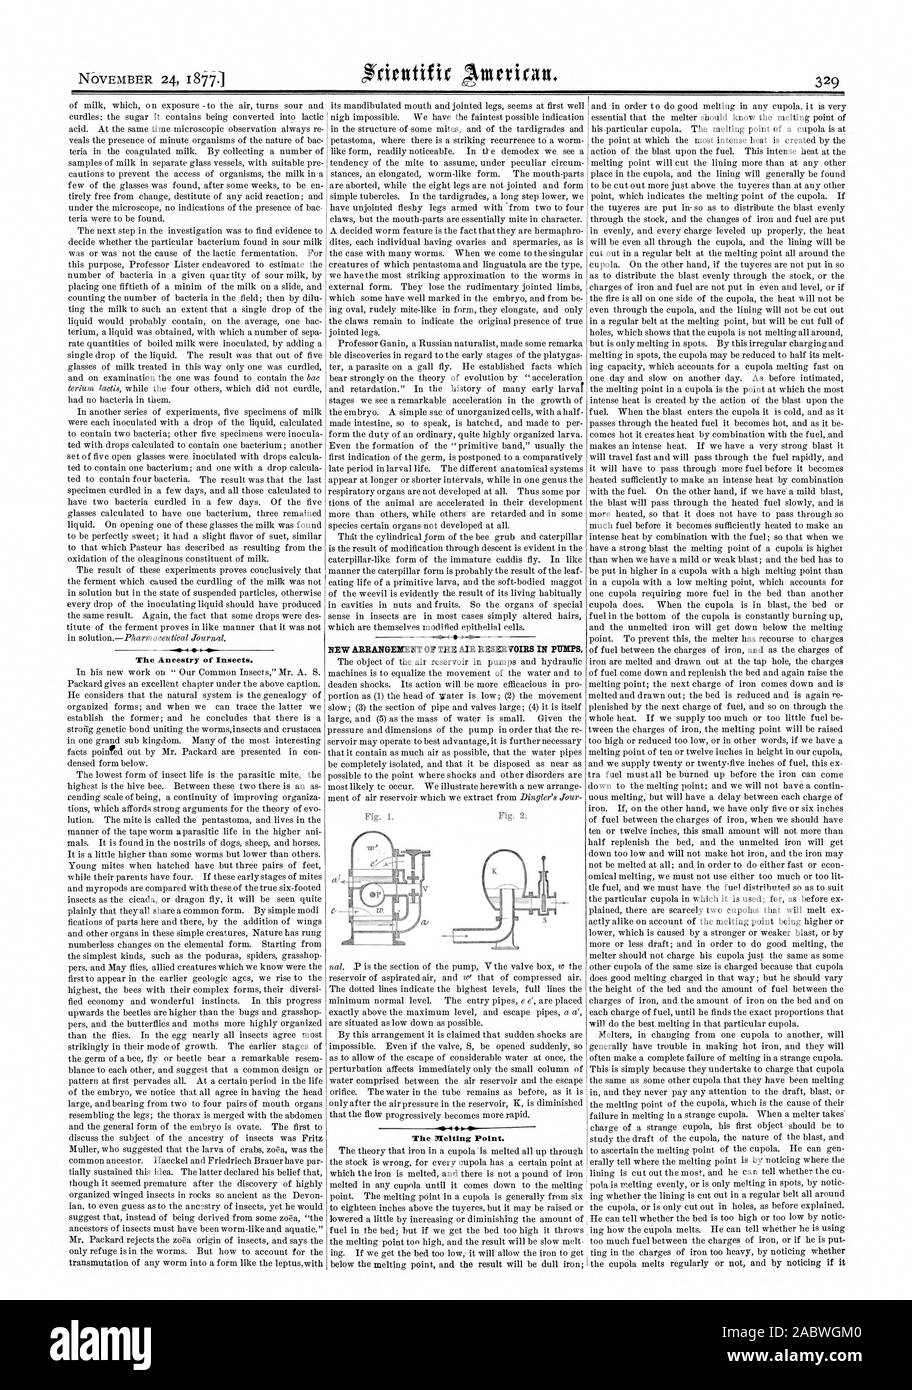 NEW ARRANGEMENT OF THE AIR RESERVOIRS IN PUMPS. The Melting Point. The Ancestry of Insects., scientific american, 1877-11-24 Stock Photo